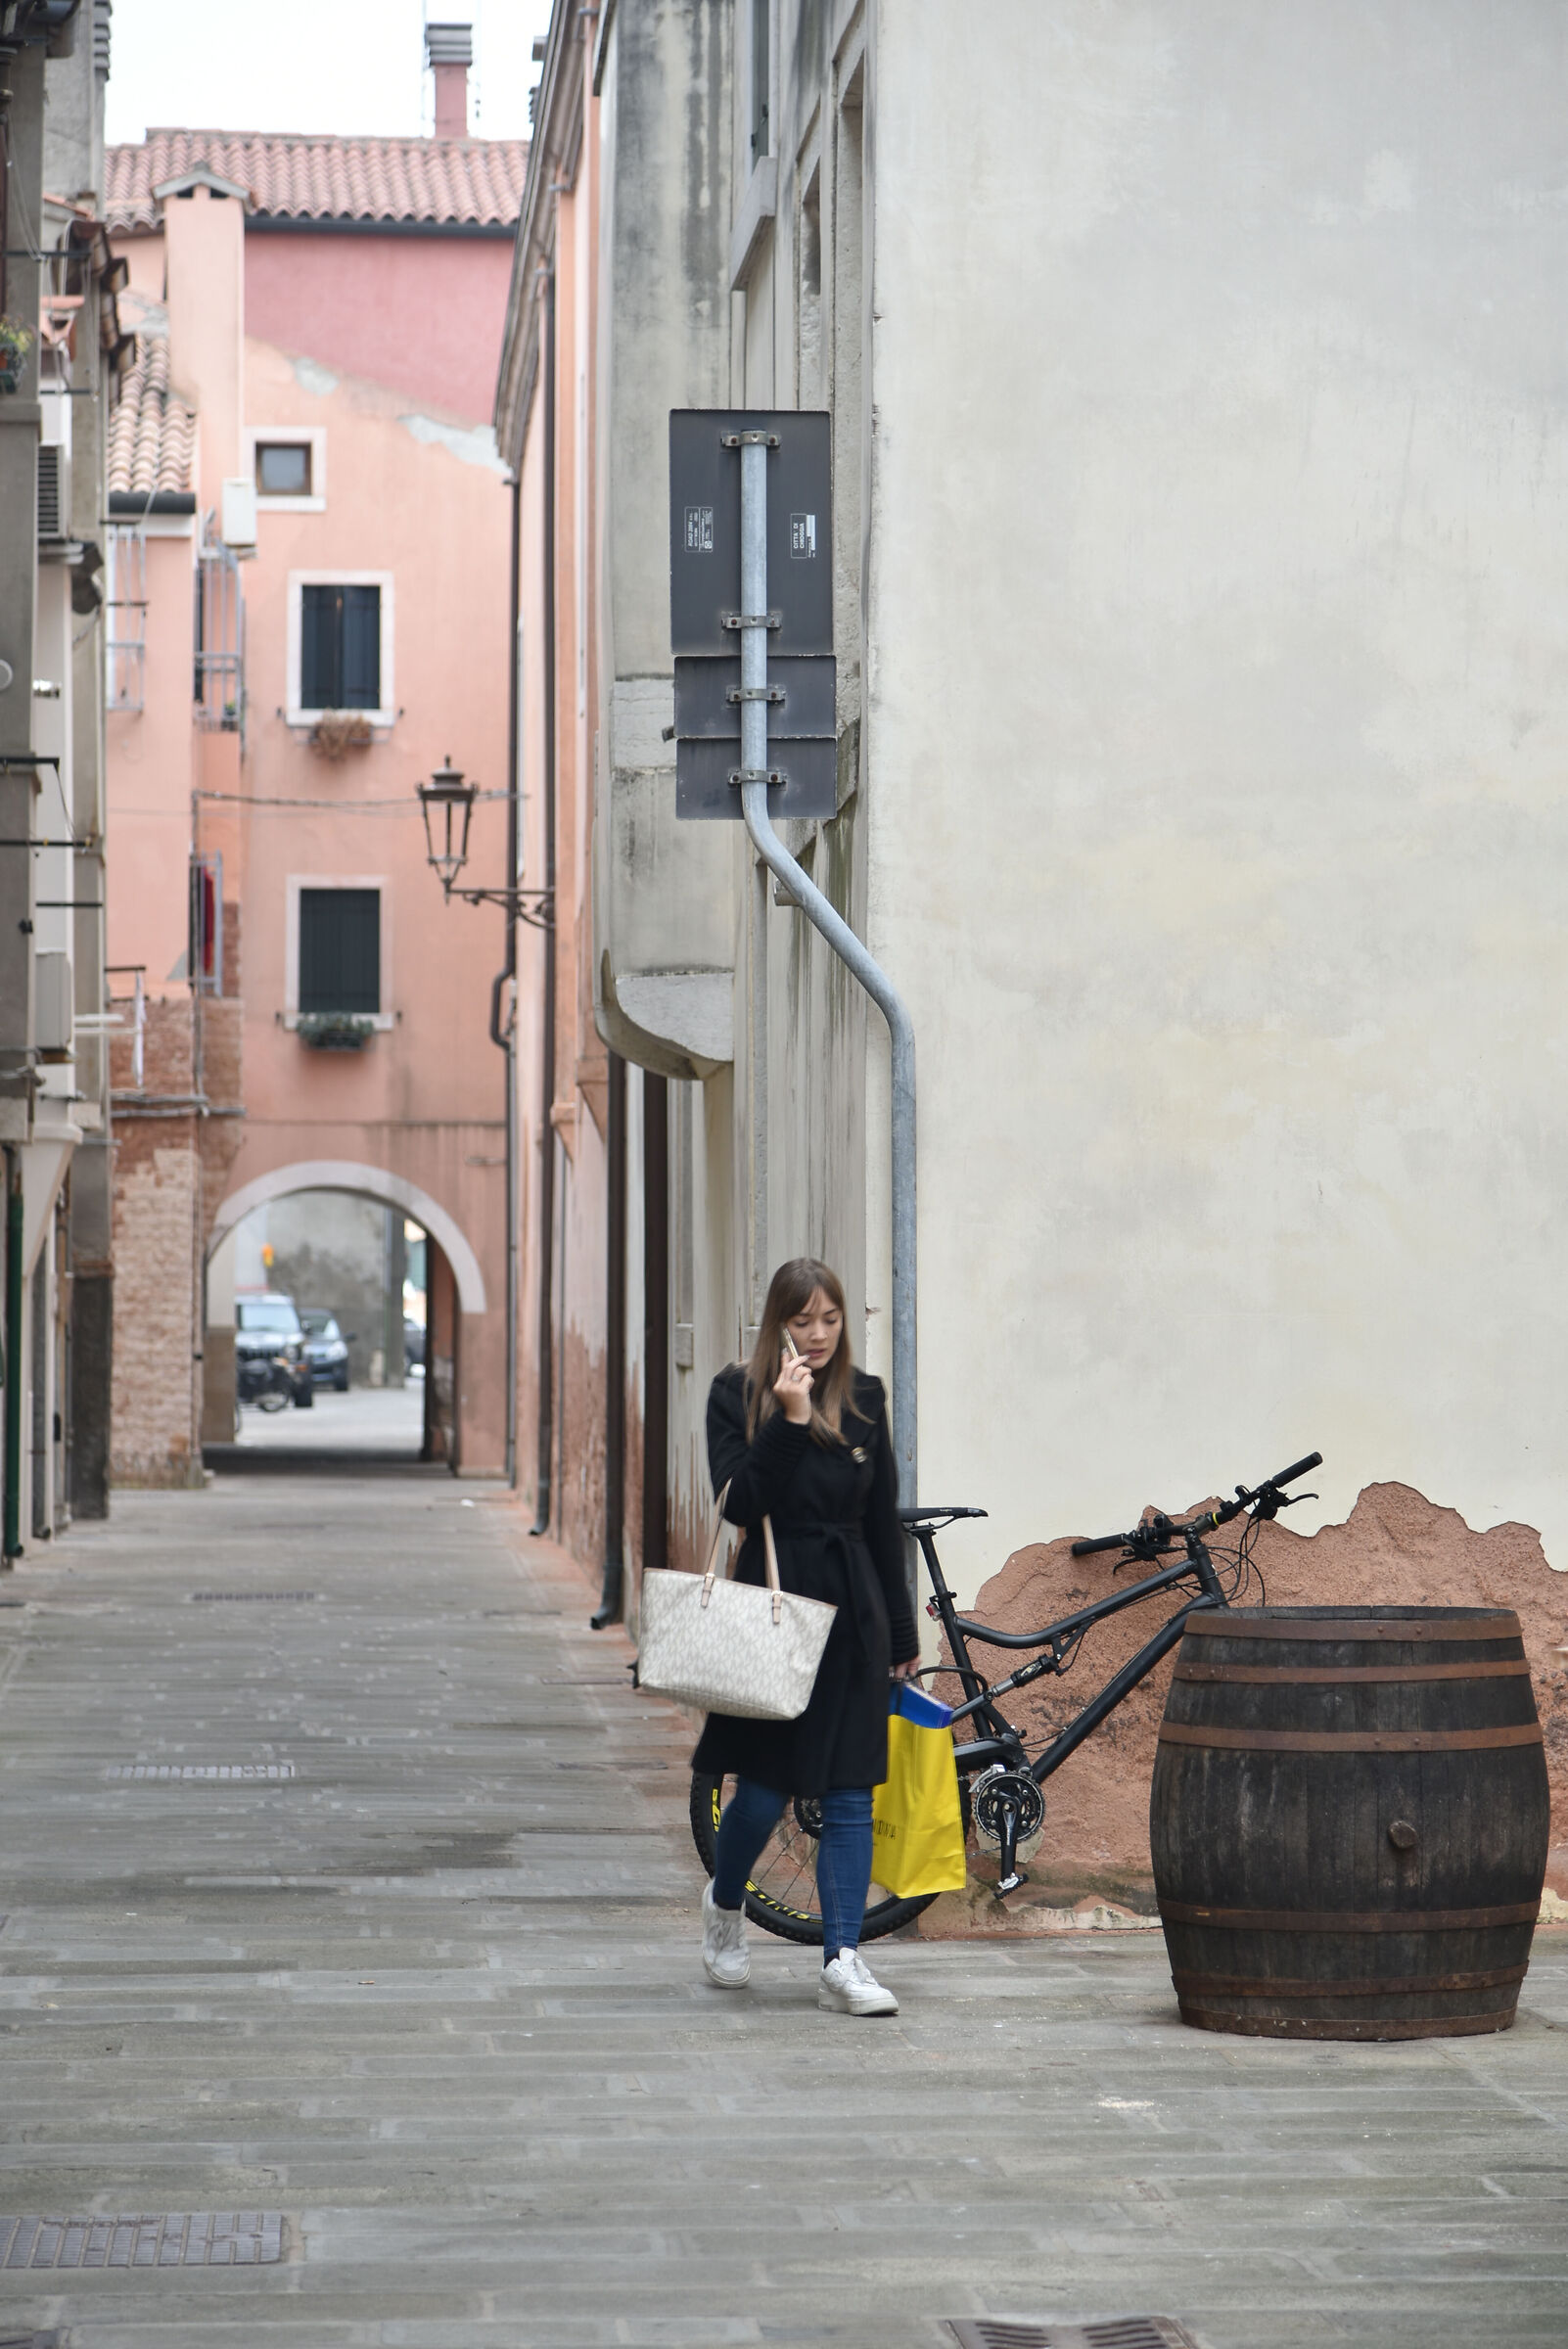 Among the alleys of Chioggia ...